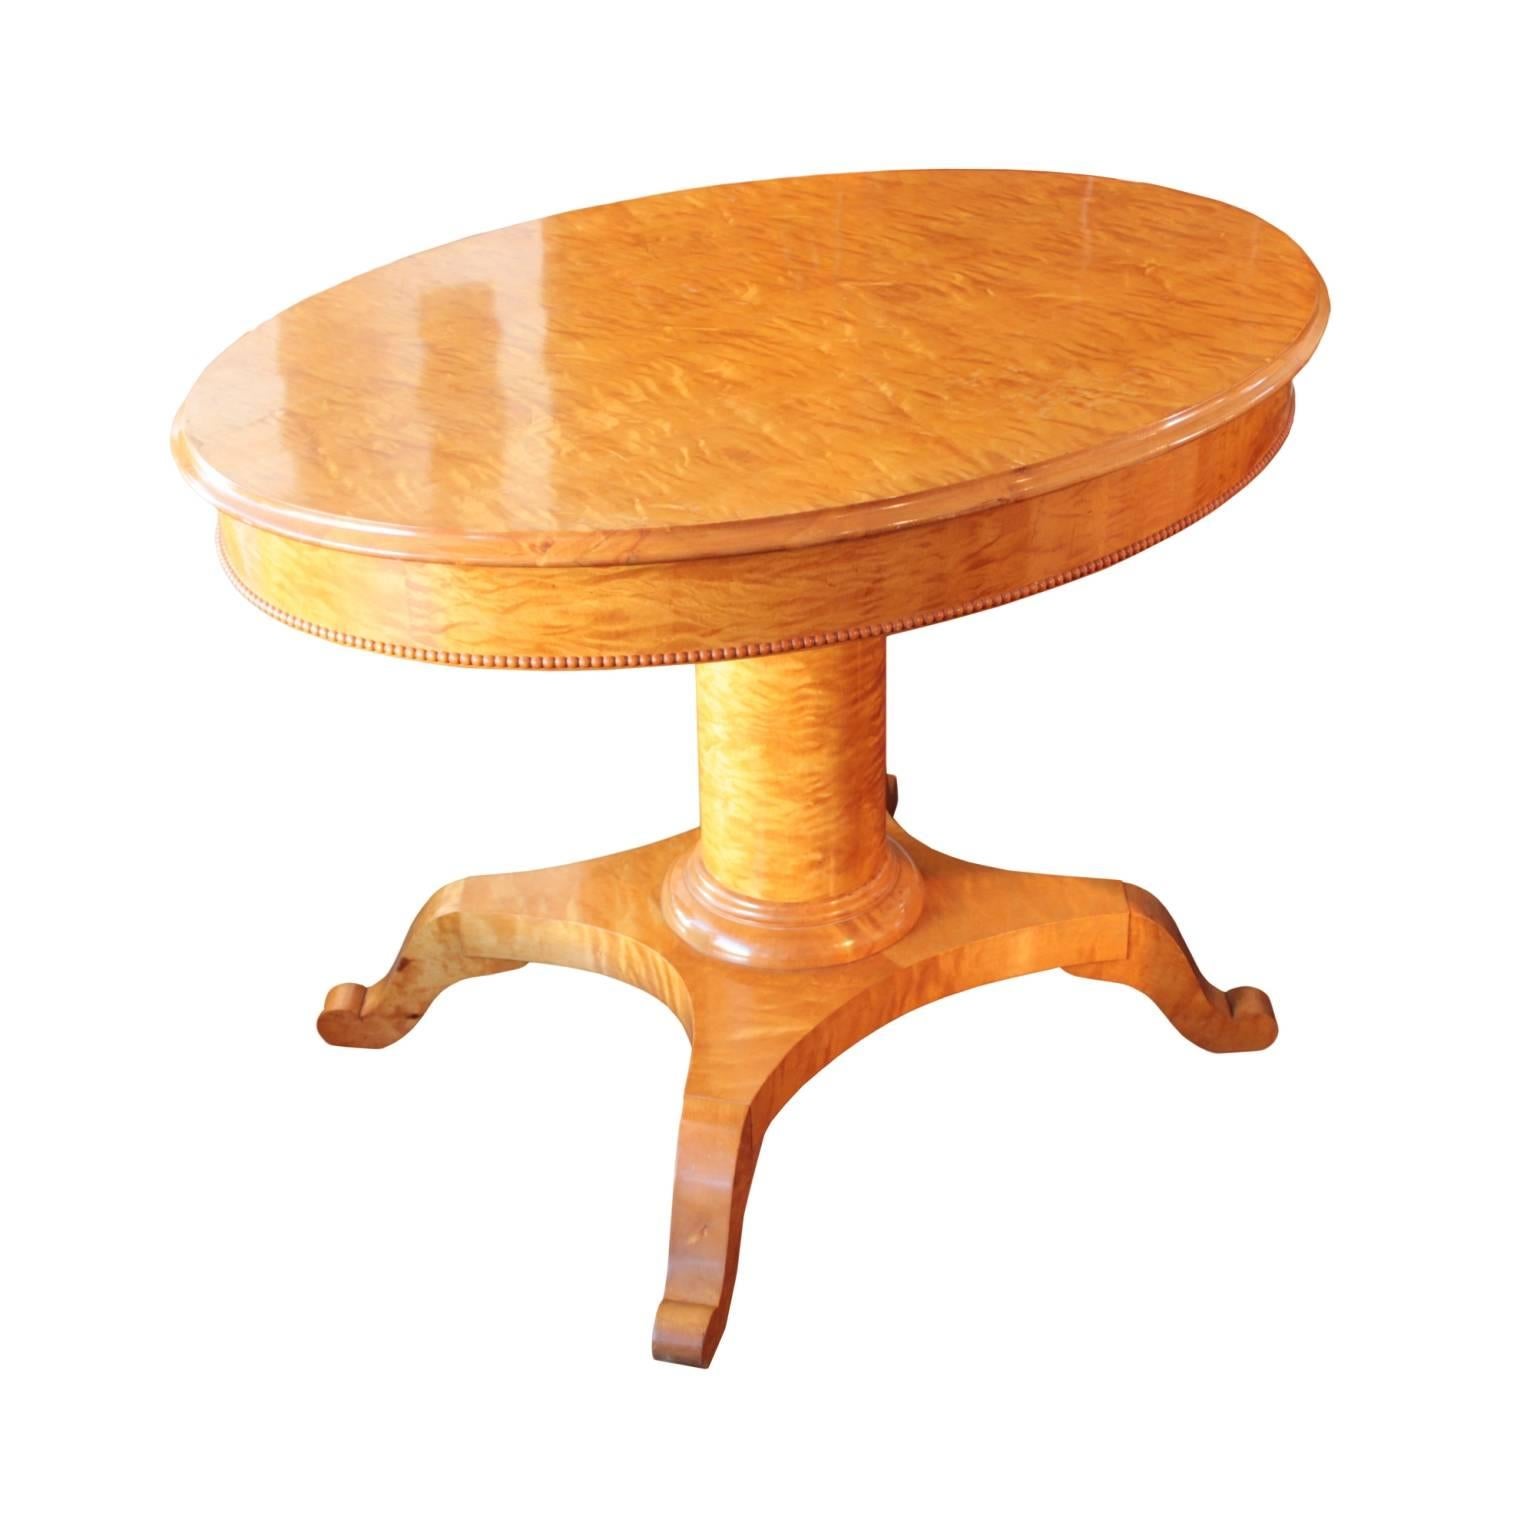 Table top with ogee edge and thick apron decorated with beaded lip molding on a column pedestal with double ring plinth, resting on a quadripartite base raised on four "S" scroll shaped legs. Rich flame birch veneer throughout. Karl Johan